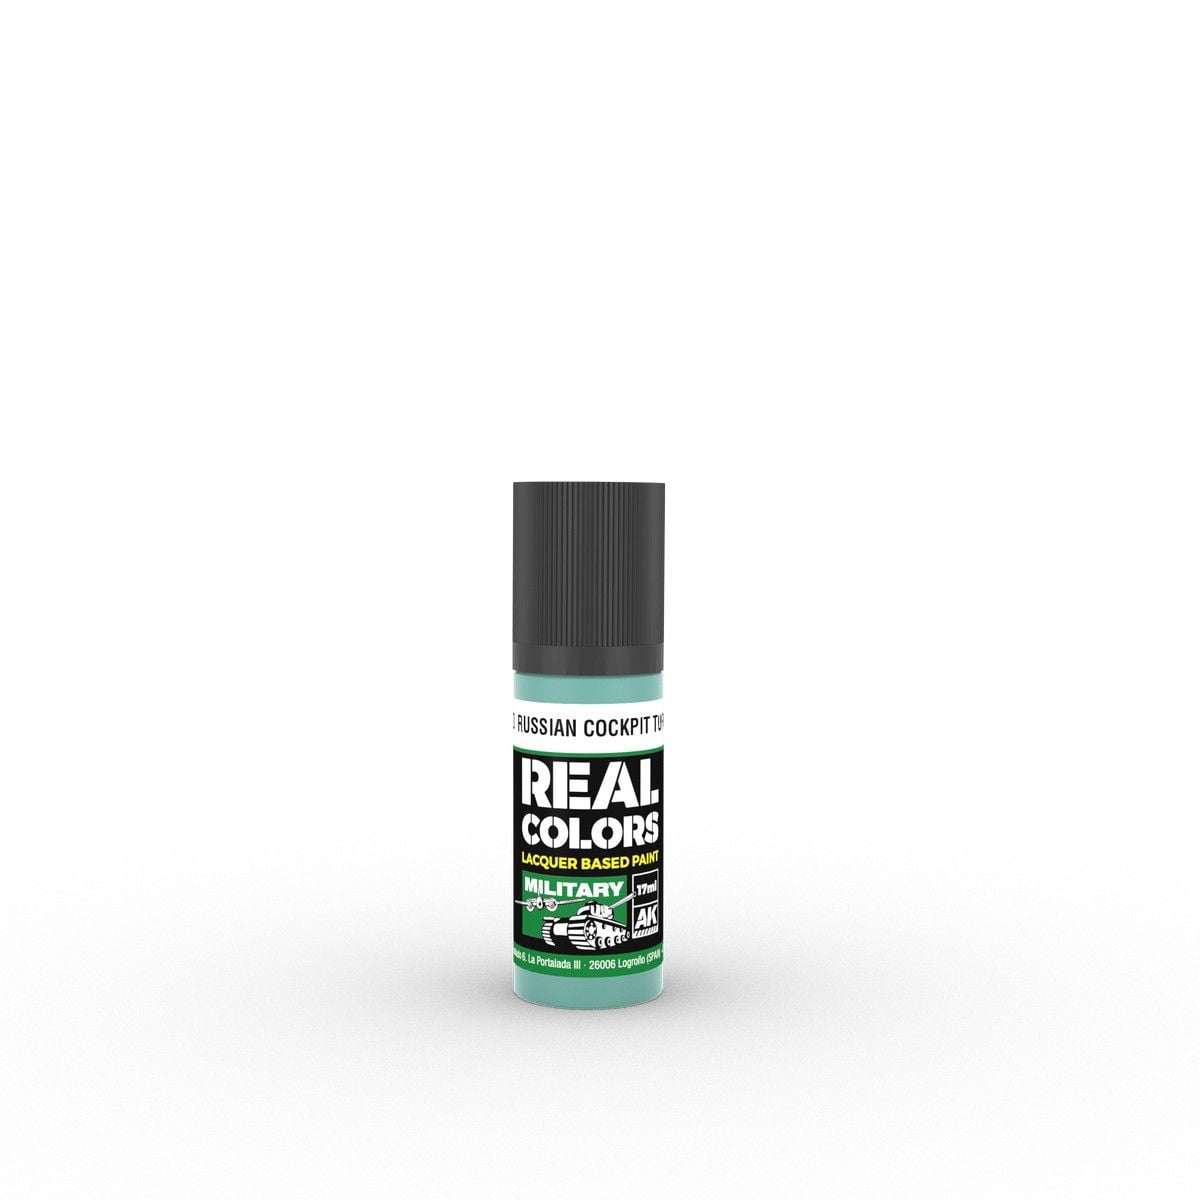 Real Colors Military: Russian Cockpit Torquoise 17ml